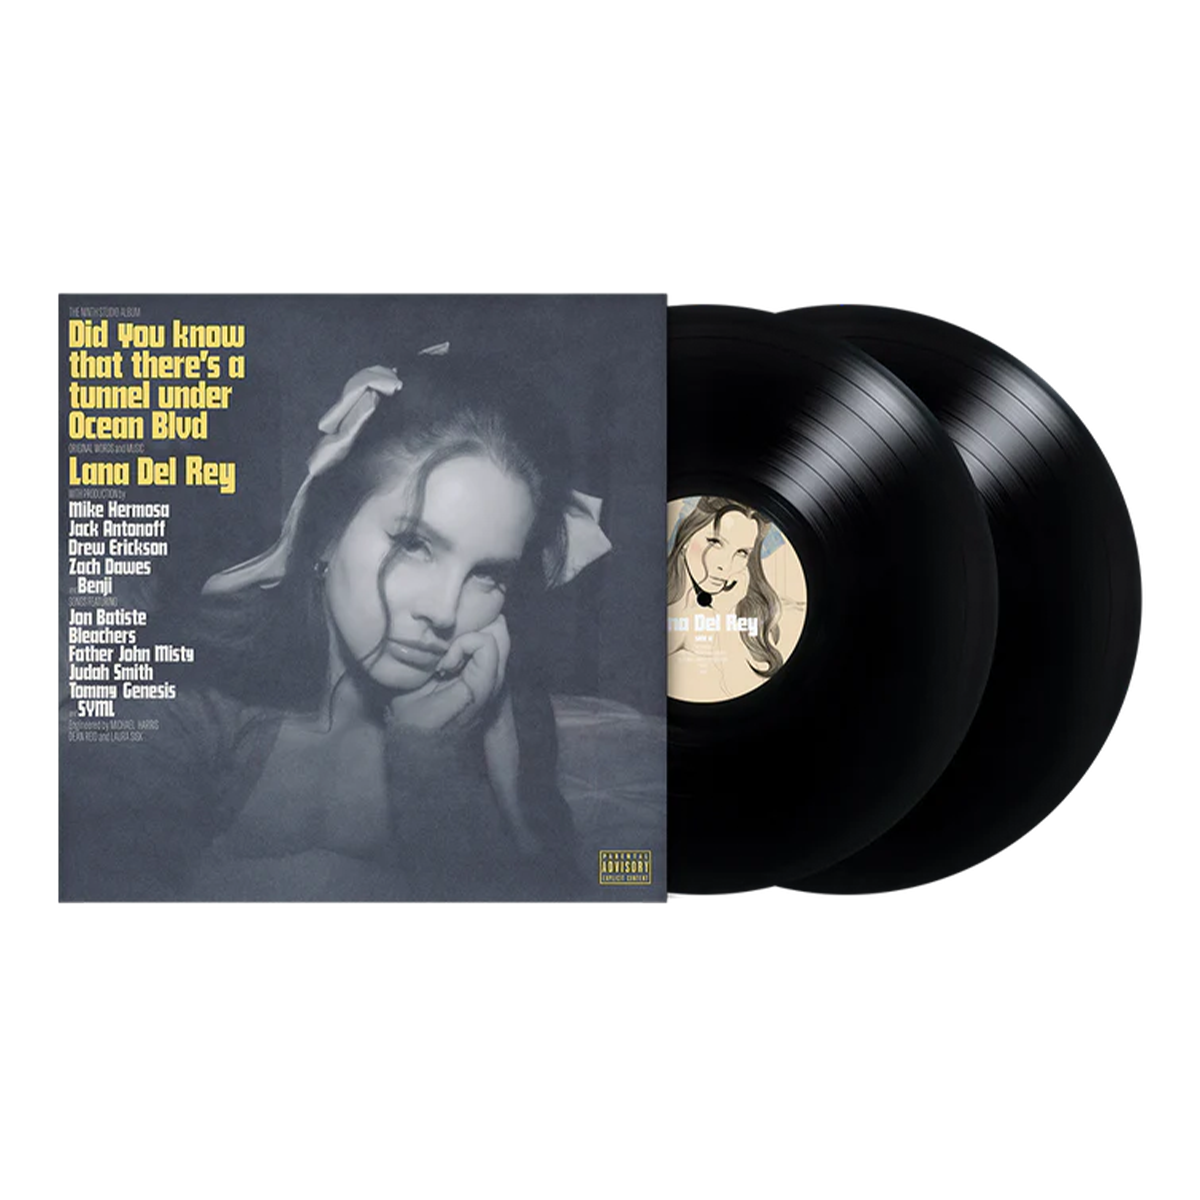 Lana Del Rey - Did you know that there's a tunnel under Ocean Blvd: 2LP